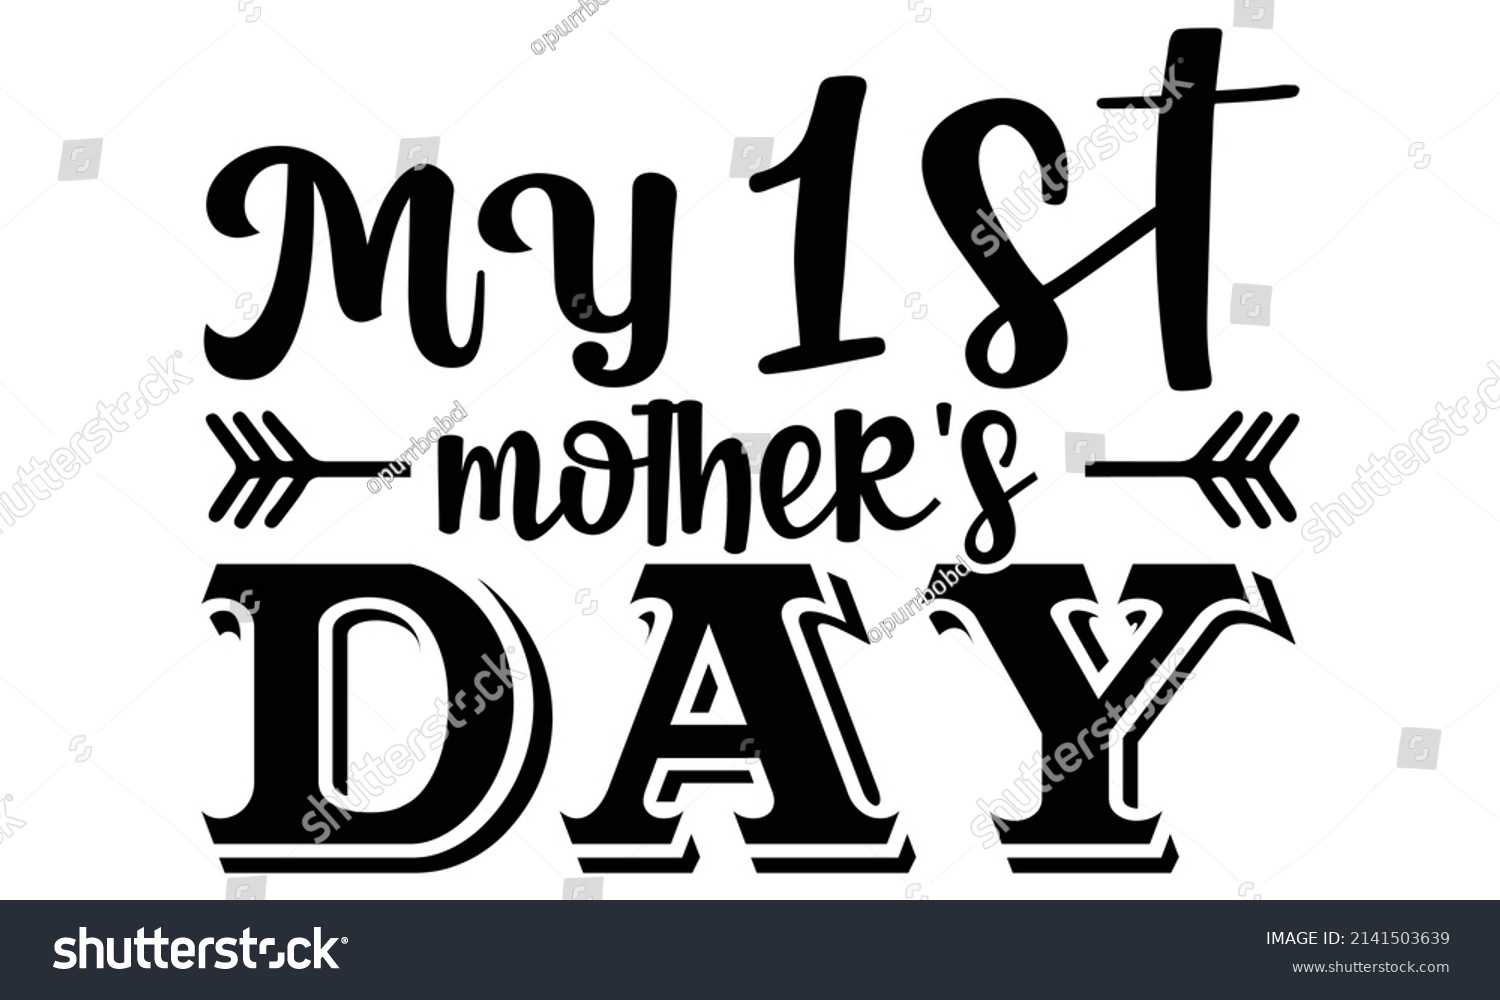 SVG of My 1st mother's day- Mother's day t-shirt design, Hand drawn lettering phrase, Calligraphy t-shirt design, Isolated on white background, Handwritten vector sign, SVG, EPS 10 svg